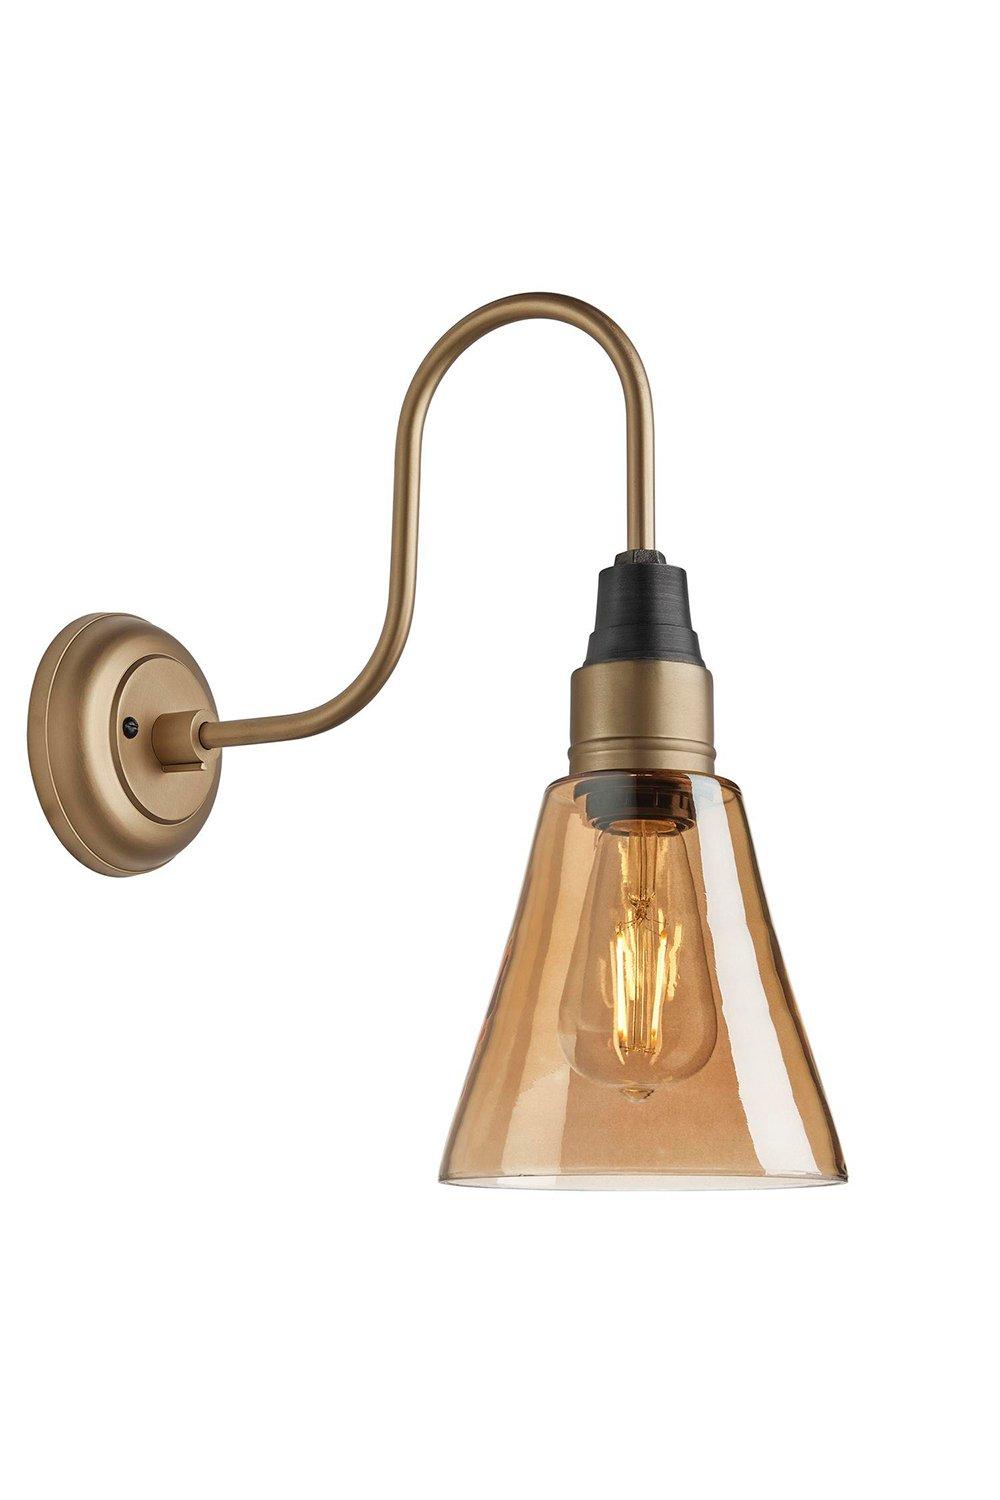 Swan Neck Tinted Glass Flask Wall Light, 6 Inch, Amber, Brass Holder